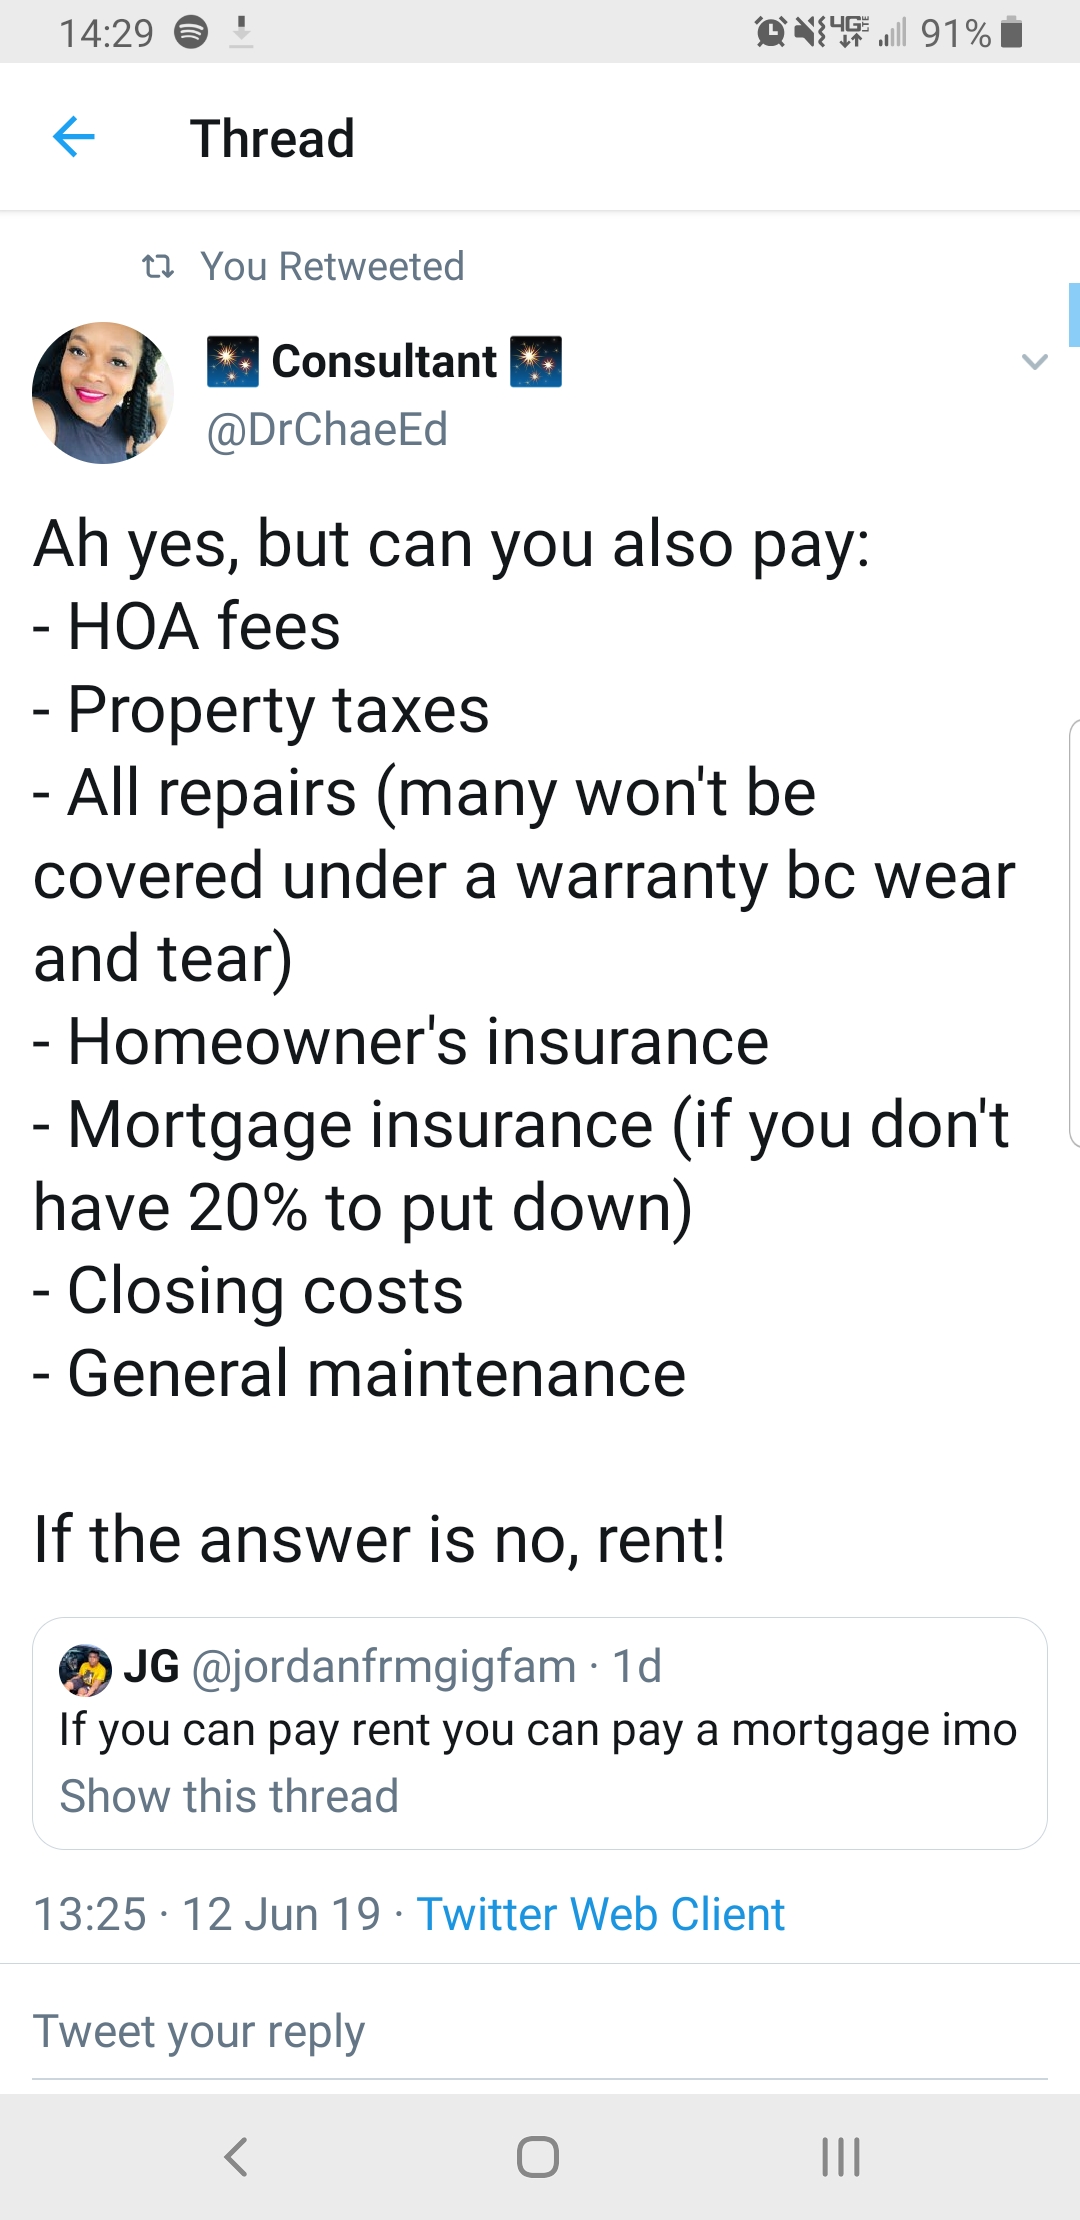 There is a time to rent and a time to own.